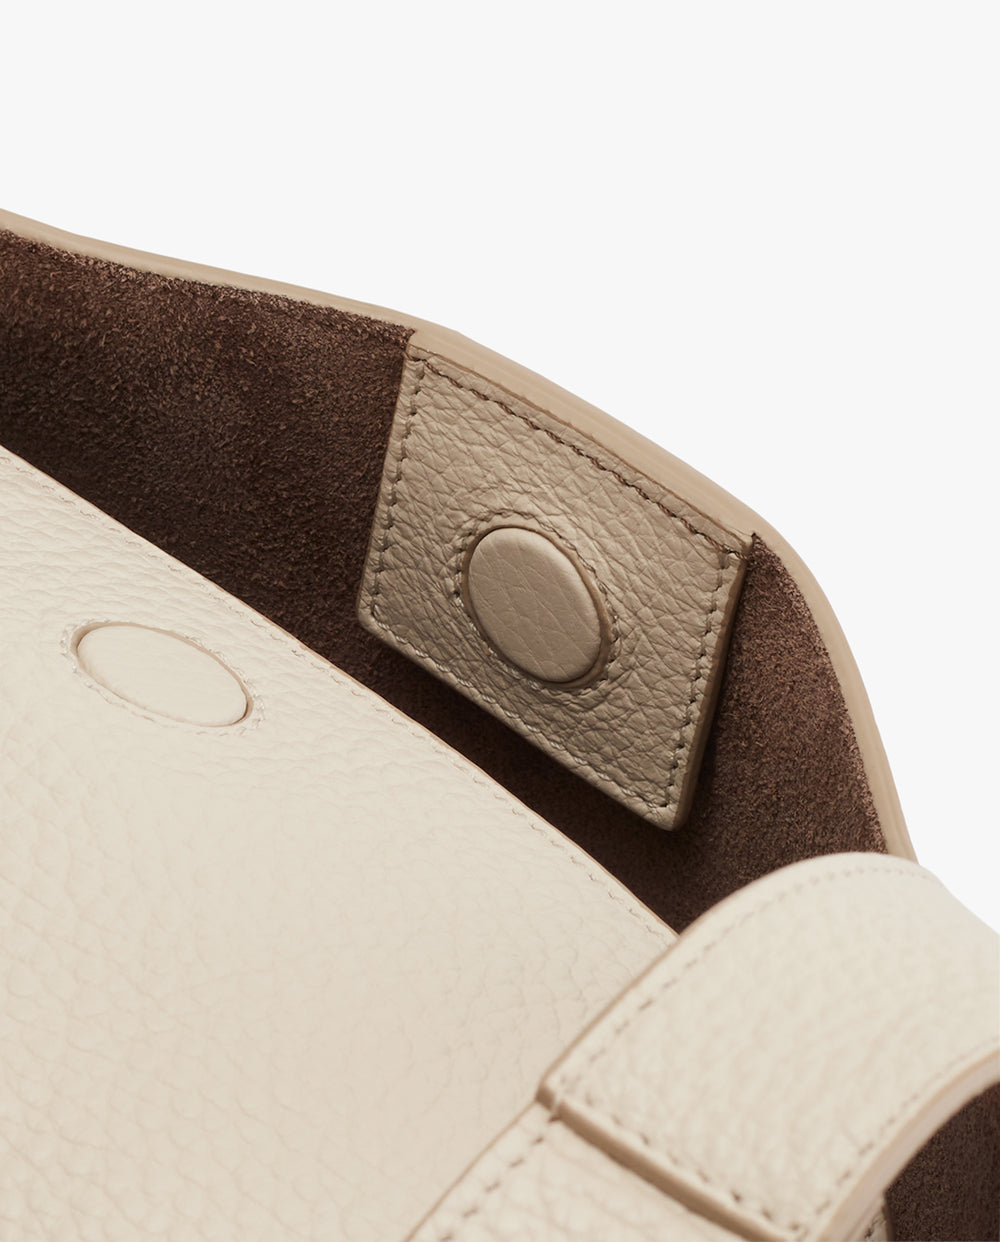 Close-up of a bag with a snap-button closure detail.